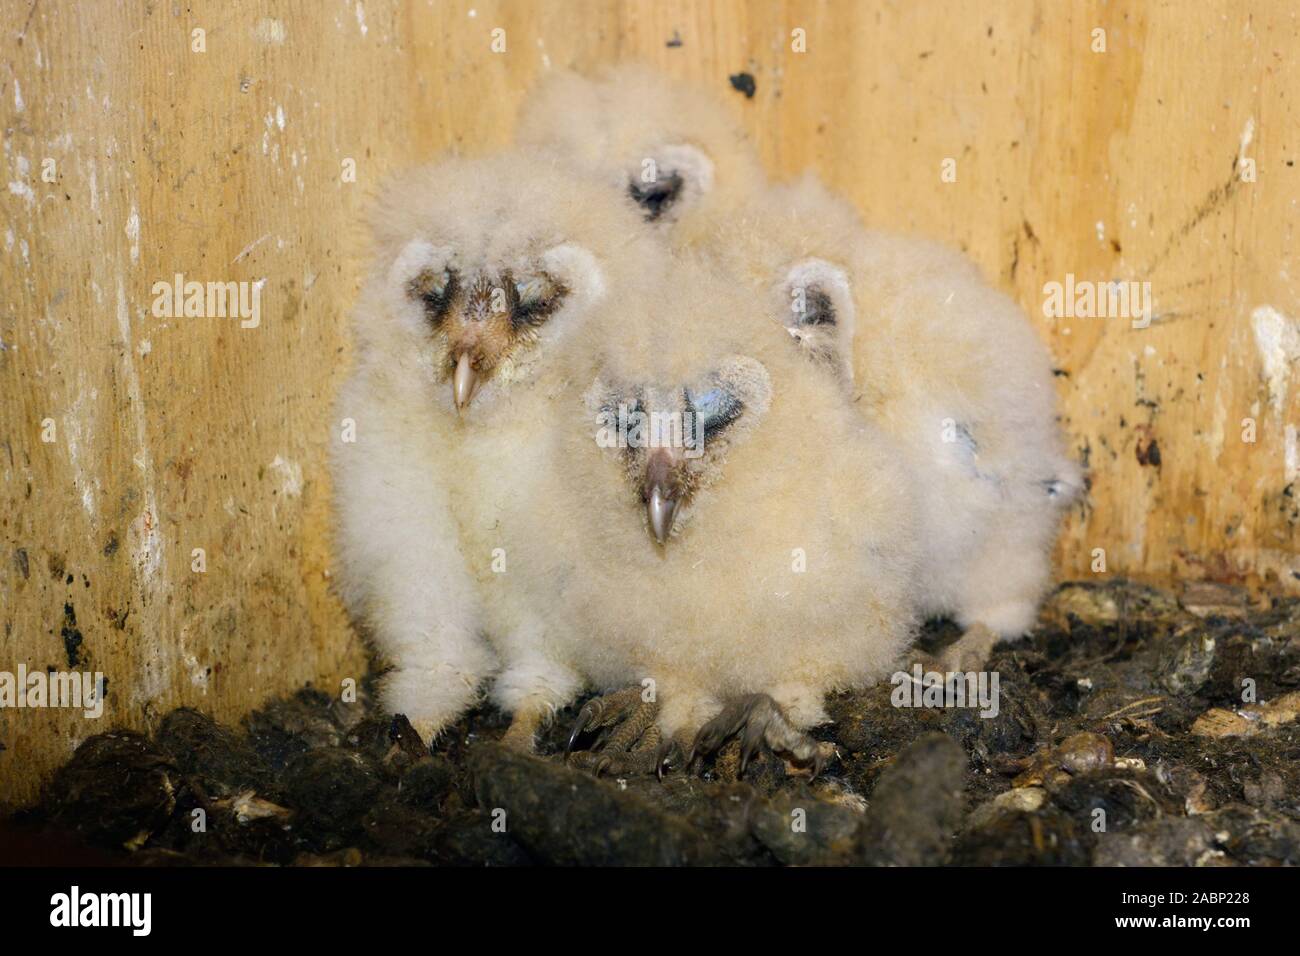 Barn Owl ( Tyto alba ), chicks, offspring, crouched, sitting in their nesting aid, sleeping, cute and funny animal babies, wildlife, Europe. Stock Photo